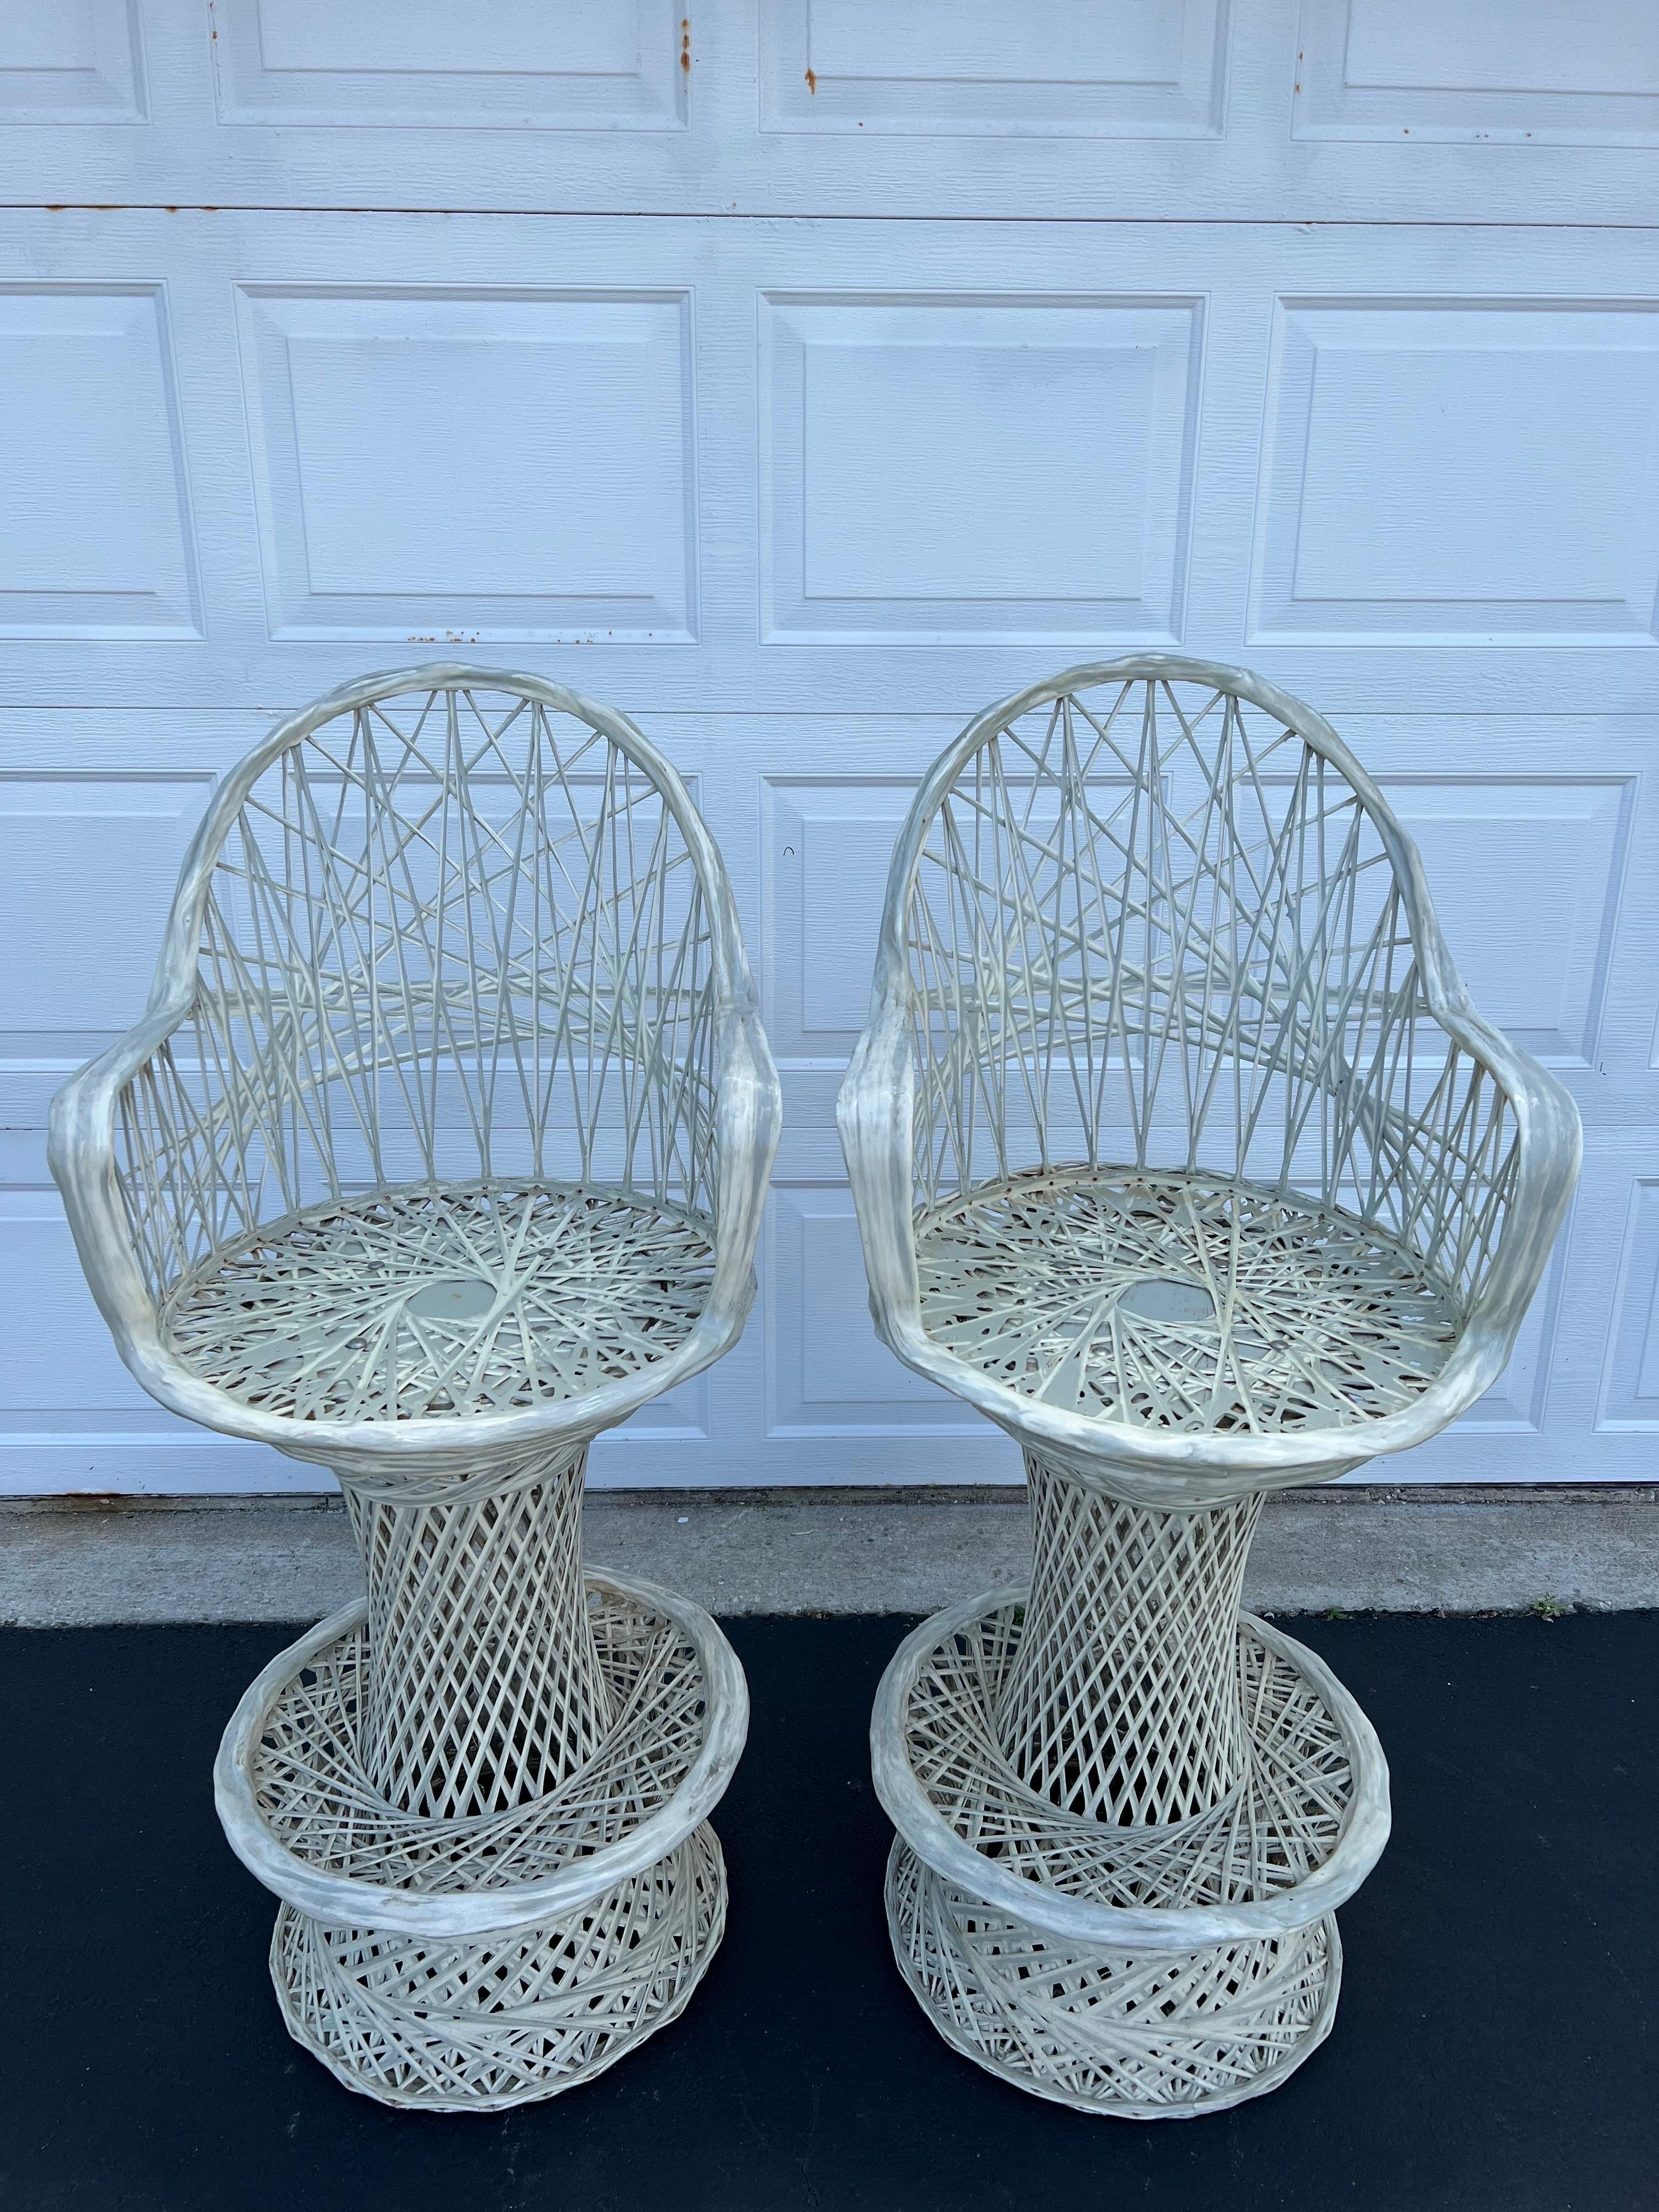 Pair of Russell Woodard Spun fiberglass bar stools that swivel. Perfect for that poolside bar in Miami. Heavy and well constructed. These chairs are an off white . The lighting makes them look blue. These can also be sprayed a gloss white.